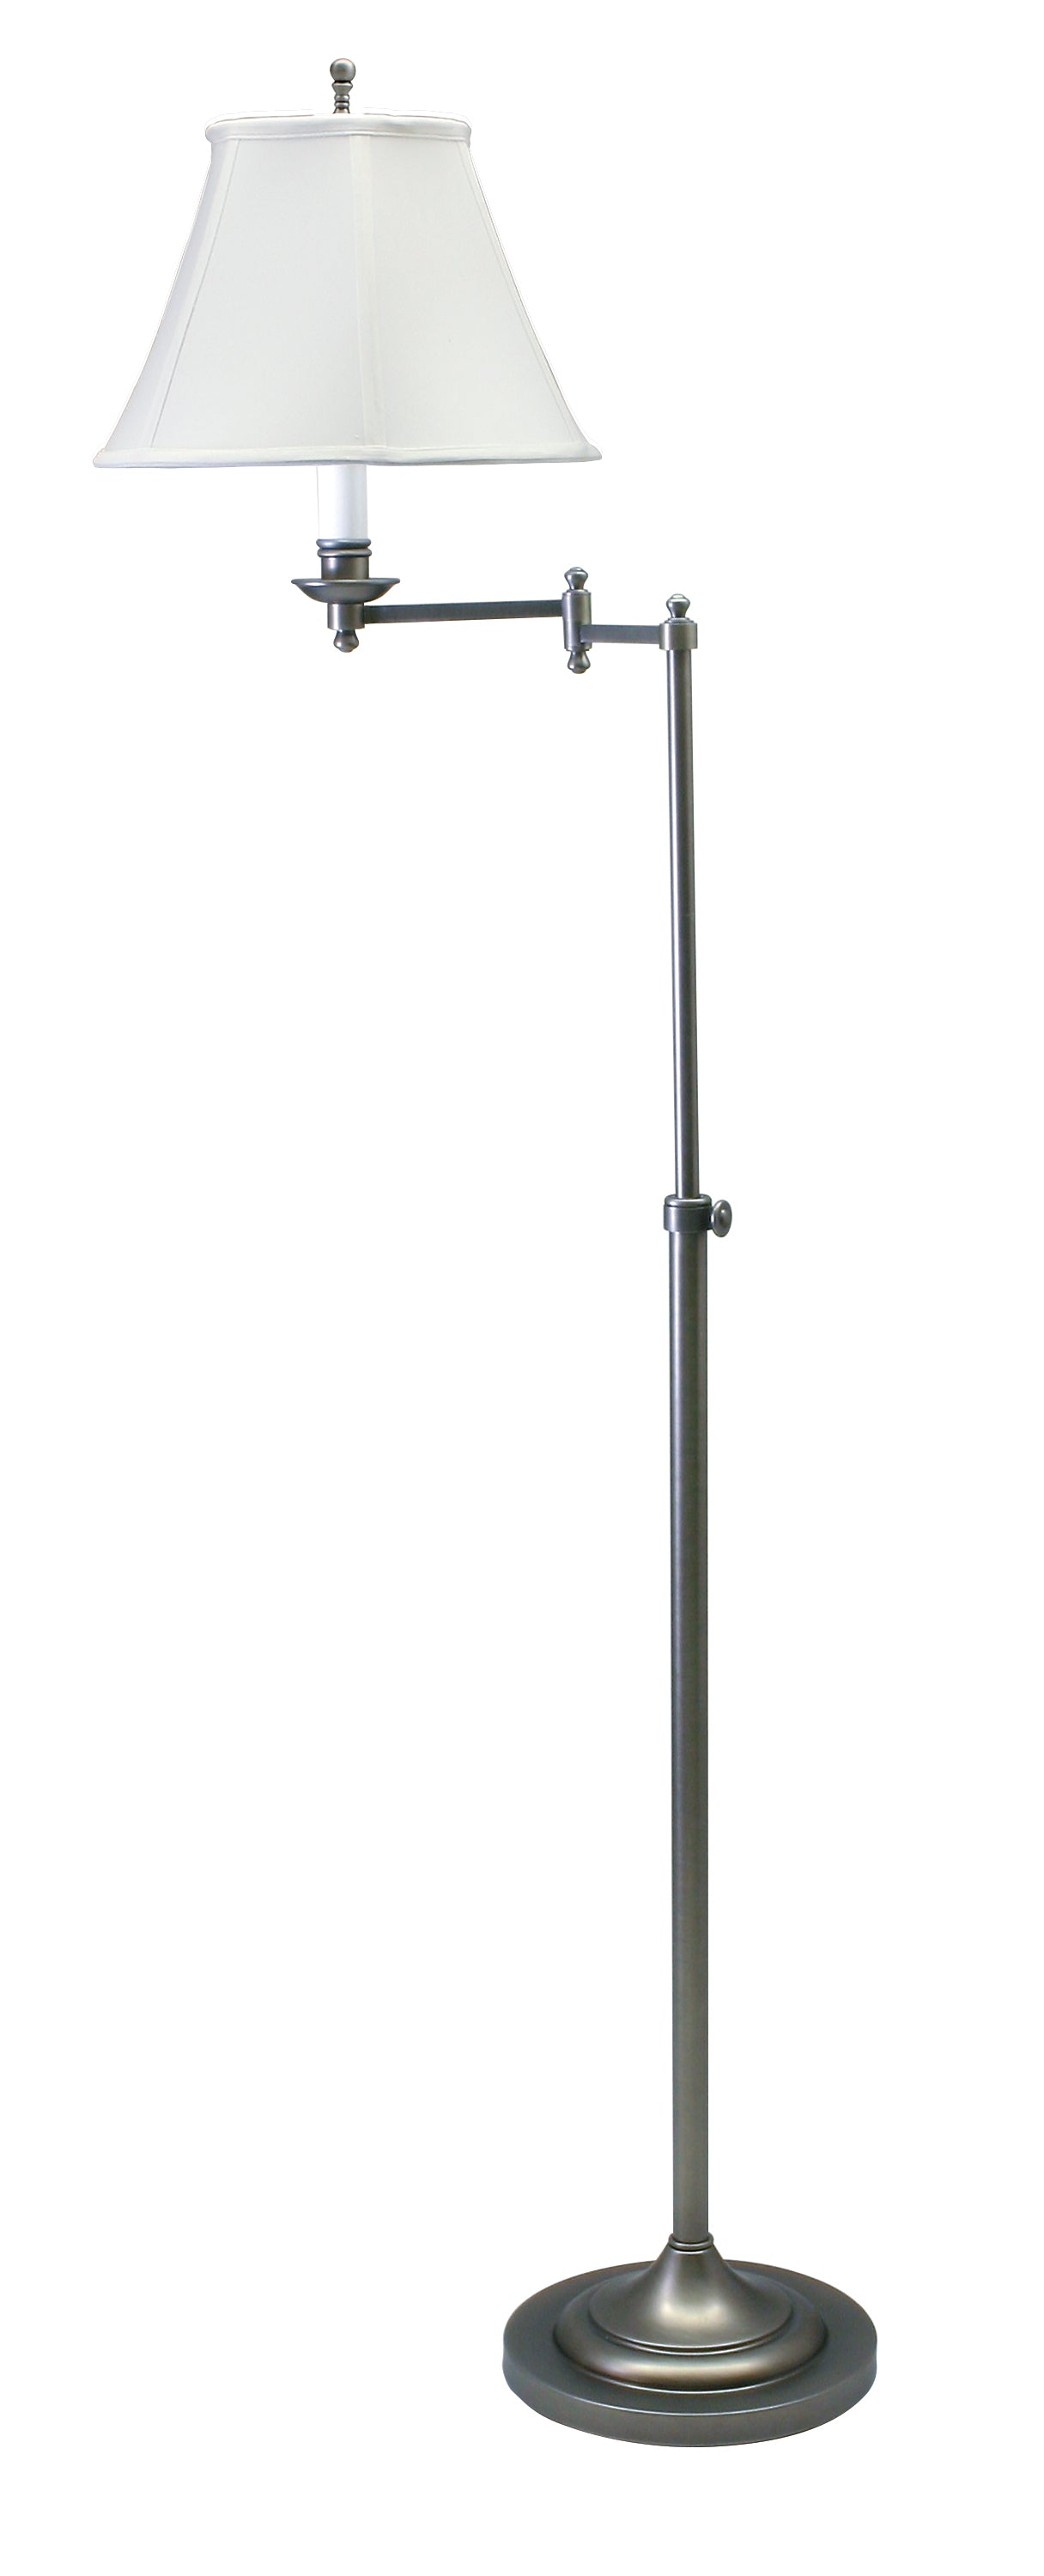 House of Troy Club Adjustable Antique Silver Floor Lamp CL200-AS